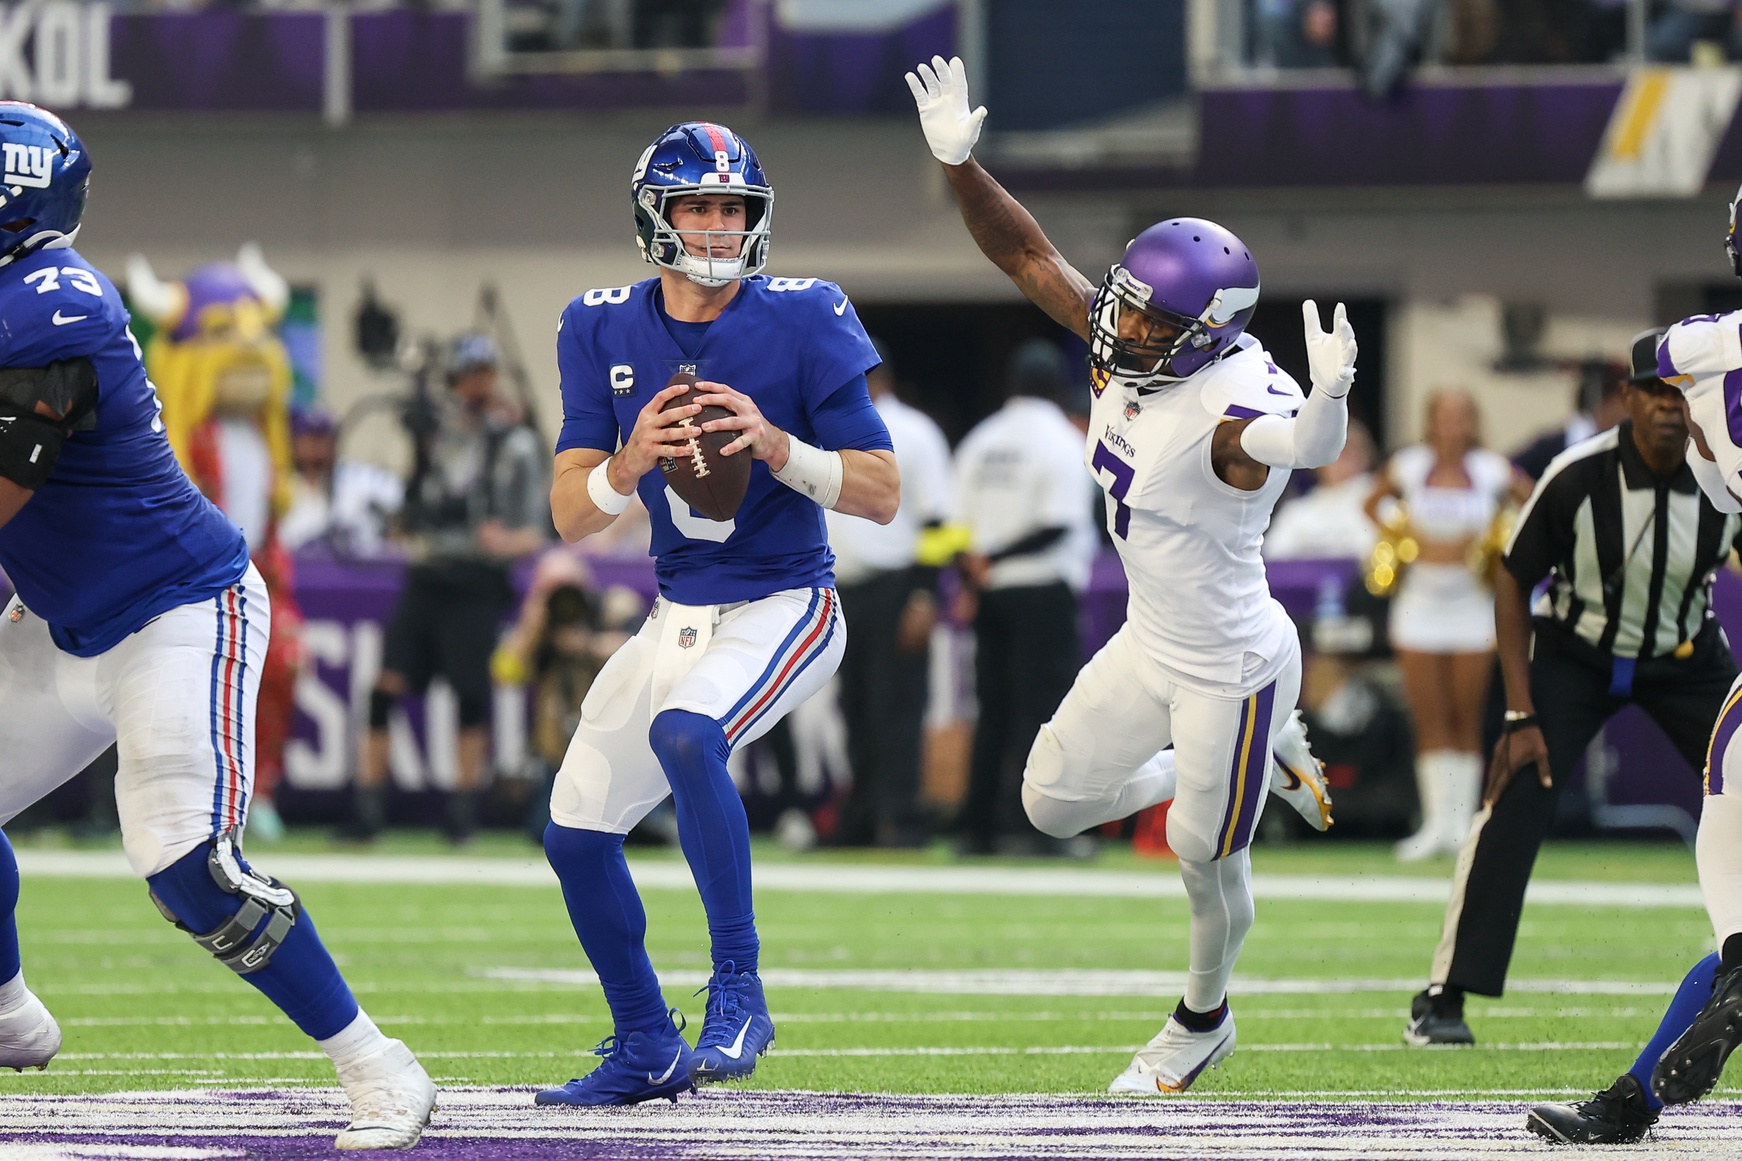 The Giants don’t seem too afraid of the Vikings